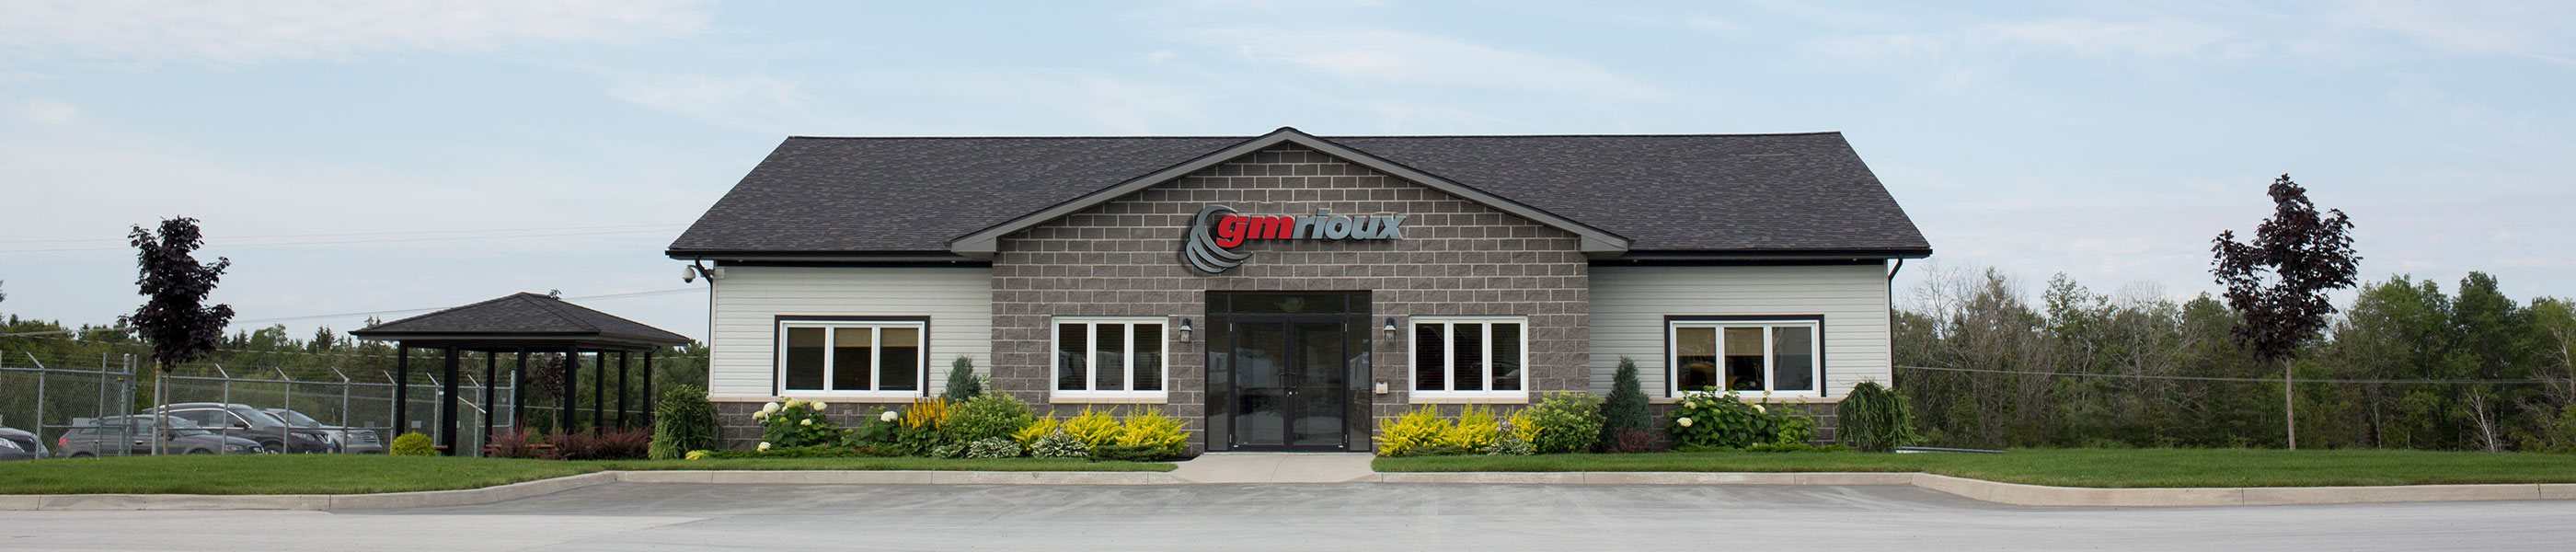 gmrioux truck and office in New Brunswick